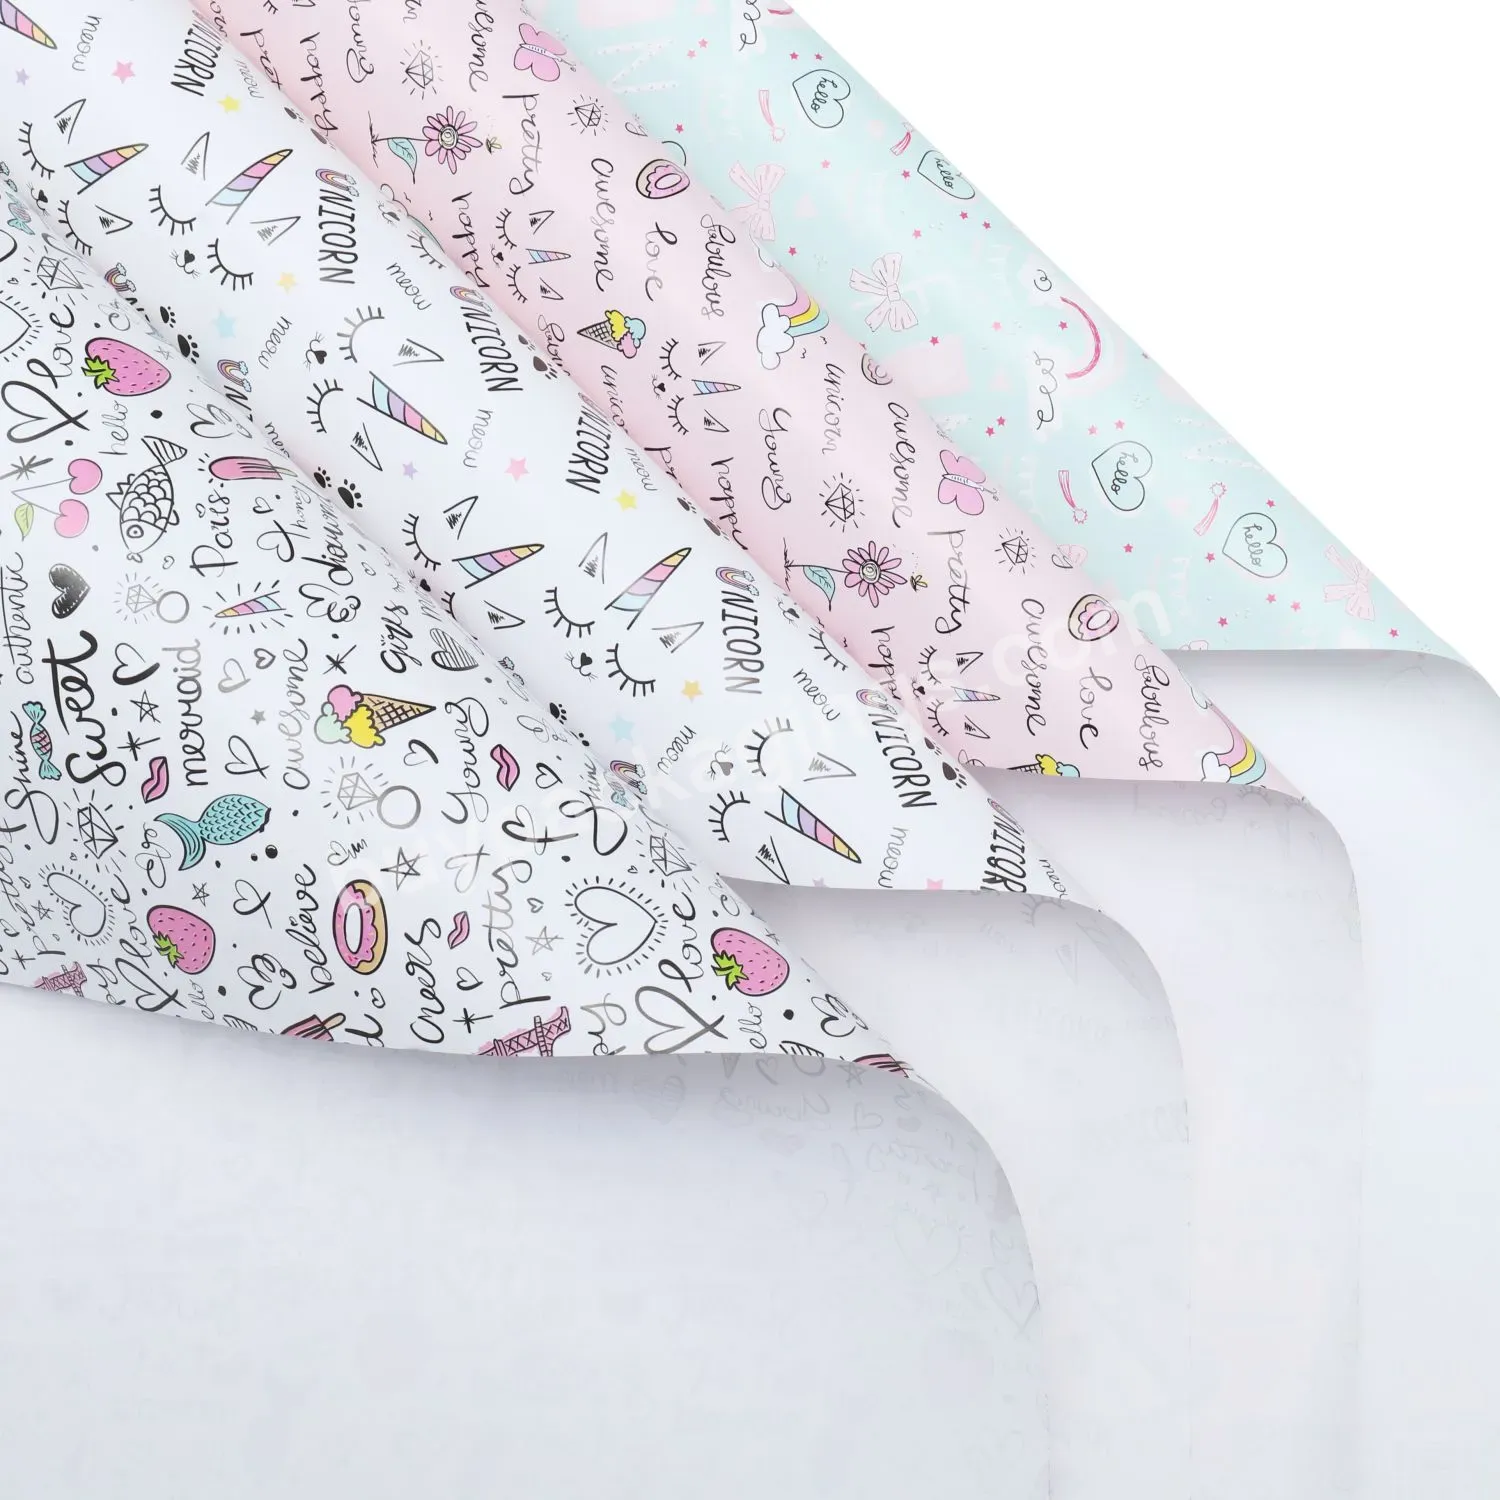 Hot Selling Unicorn Wrapping Paper For Baby Shower Kids Birthday - Buy Hot Selling Unicorn Wrapping Paper,Baby Shower Kids Birthday,Wrapping Paper.